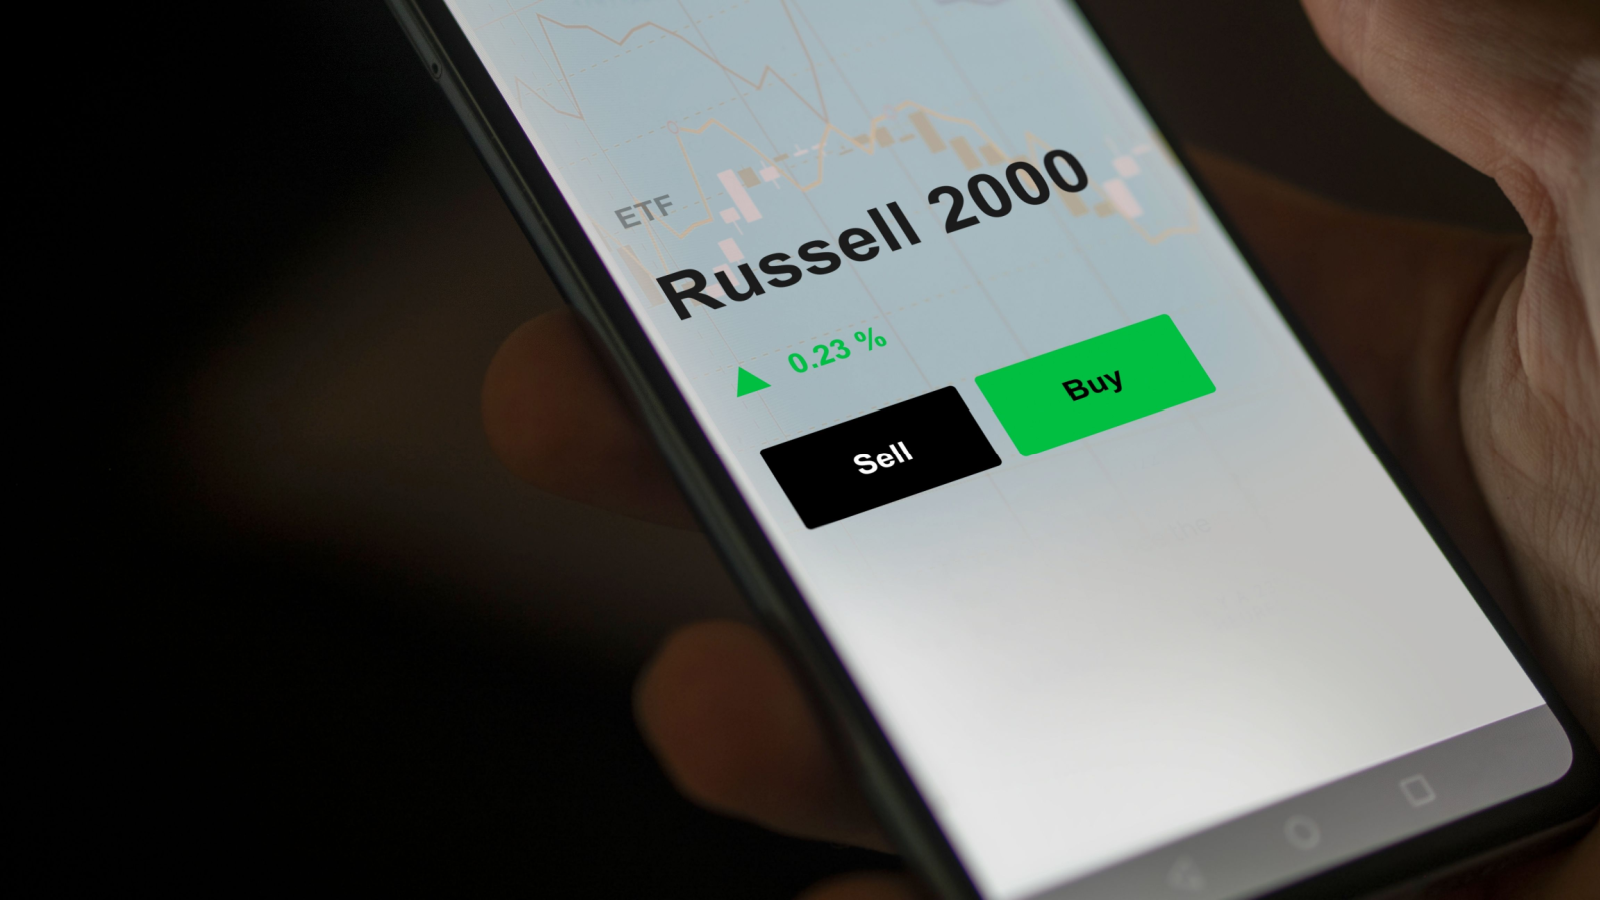 3 Russell 2000 Stocks That Could Make Your February Unforgettable